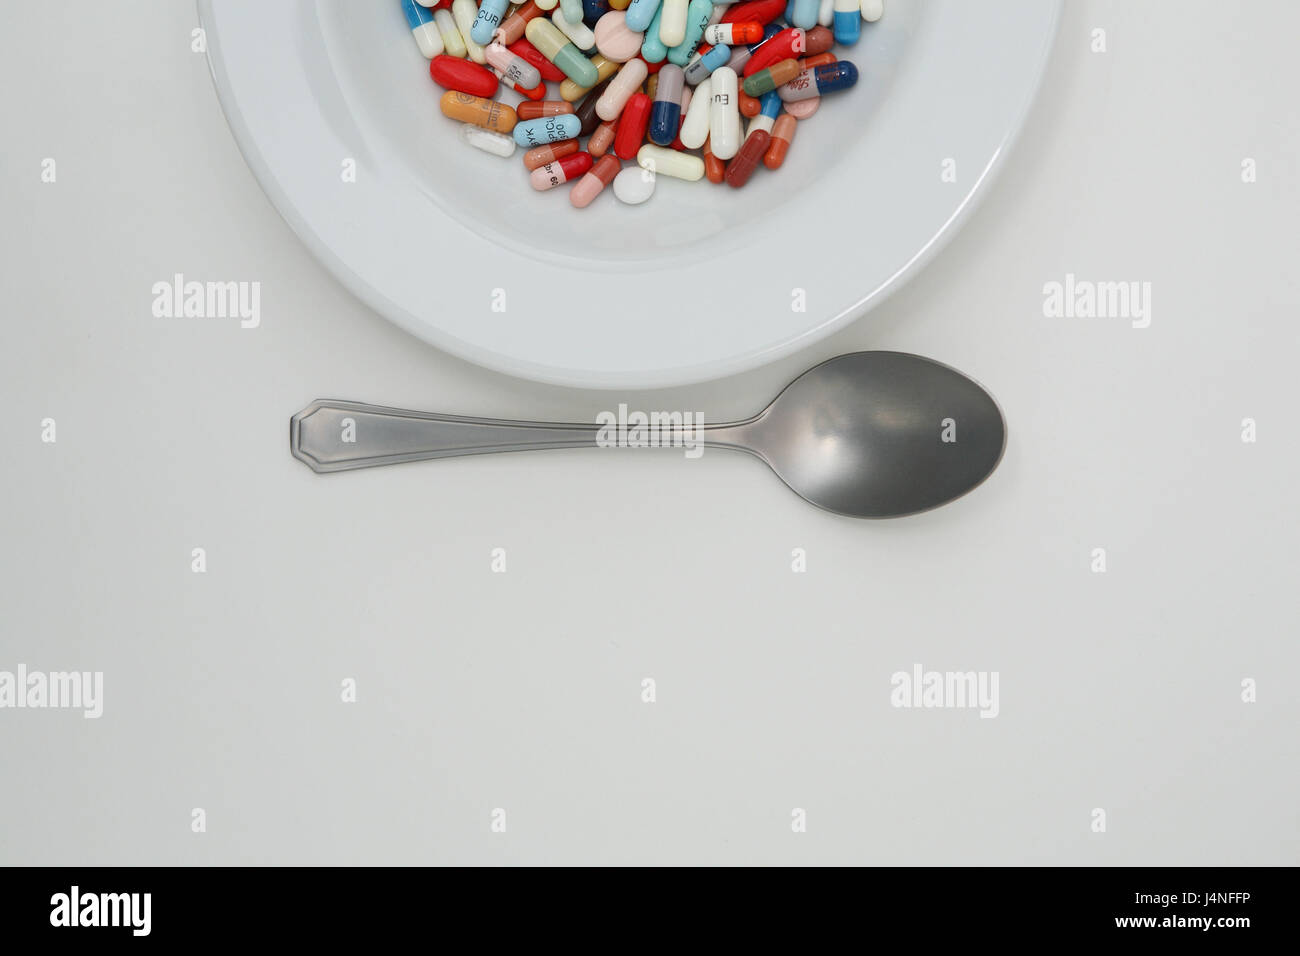 Drugs, plates, tablets, capsules, spoon, curled, Stock Photo